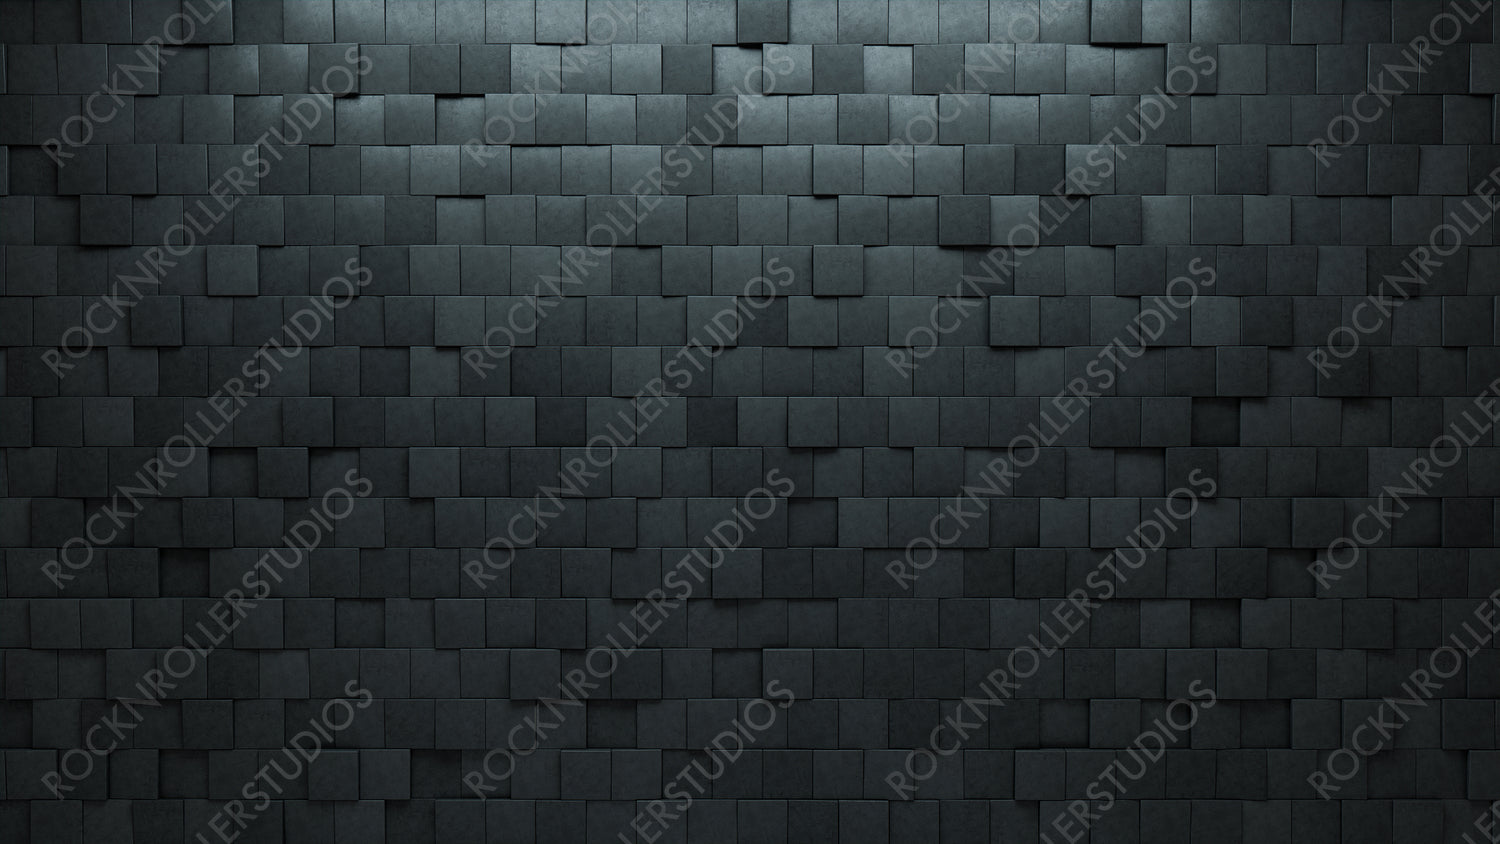 Square, Polished Wall background with tiles. Futuristic, tile Wallpaper with 3D, Concrete blocks. 3D Render